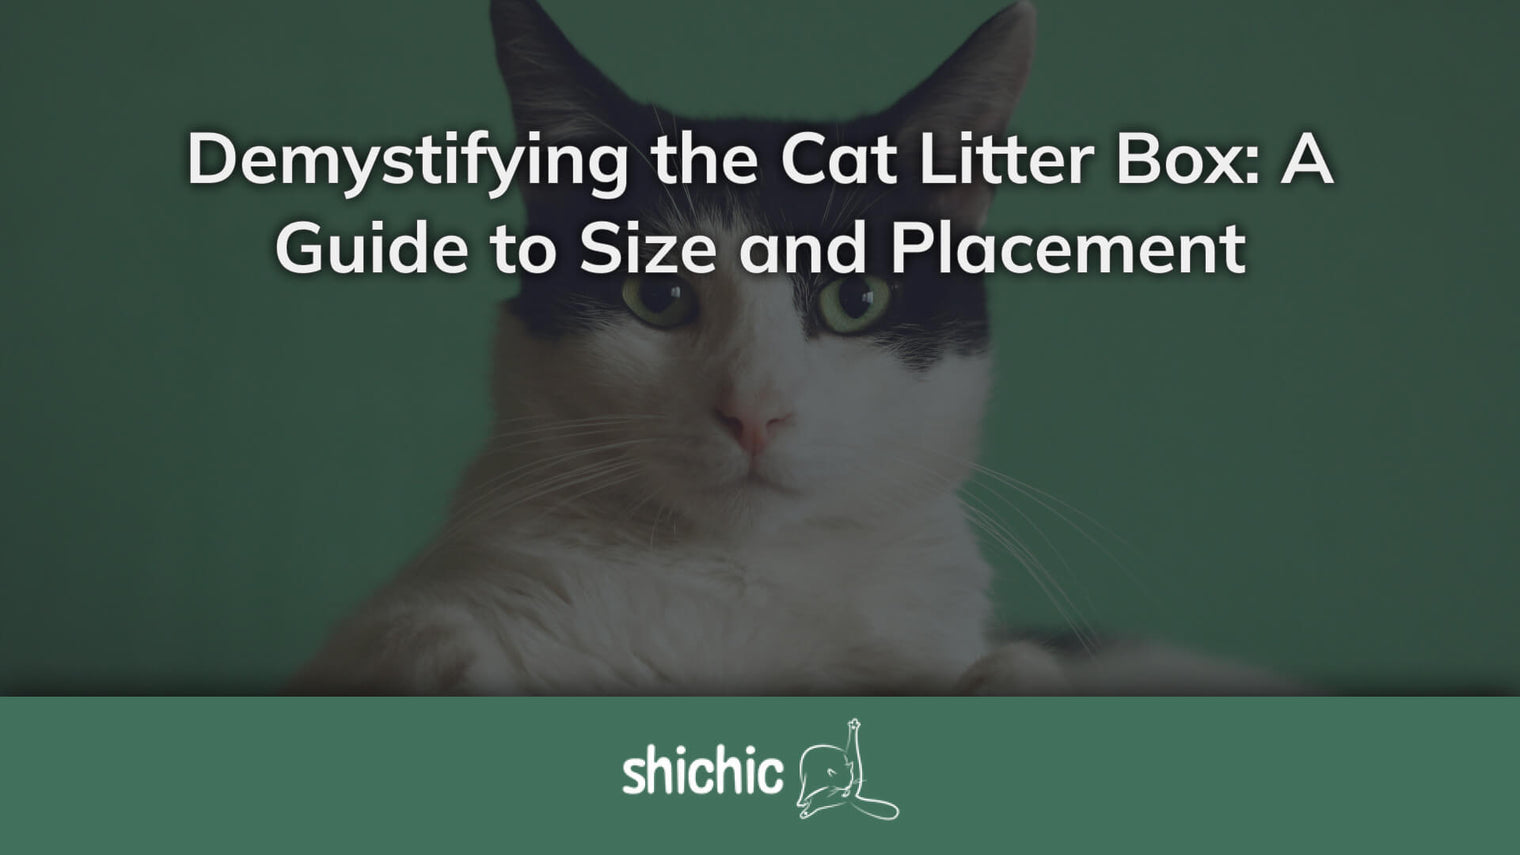 Demystifying the Cat Litter Box: A Guide to Size and Placement - Shichic